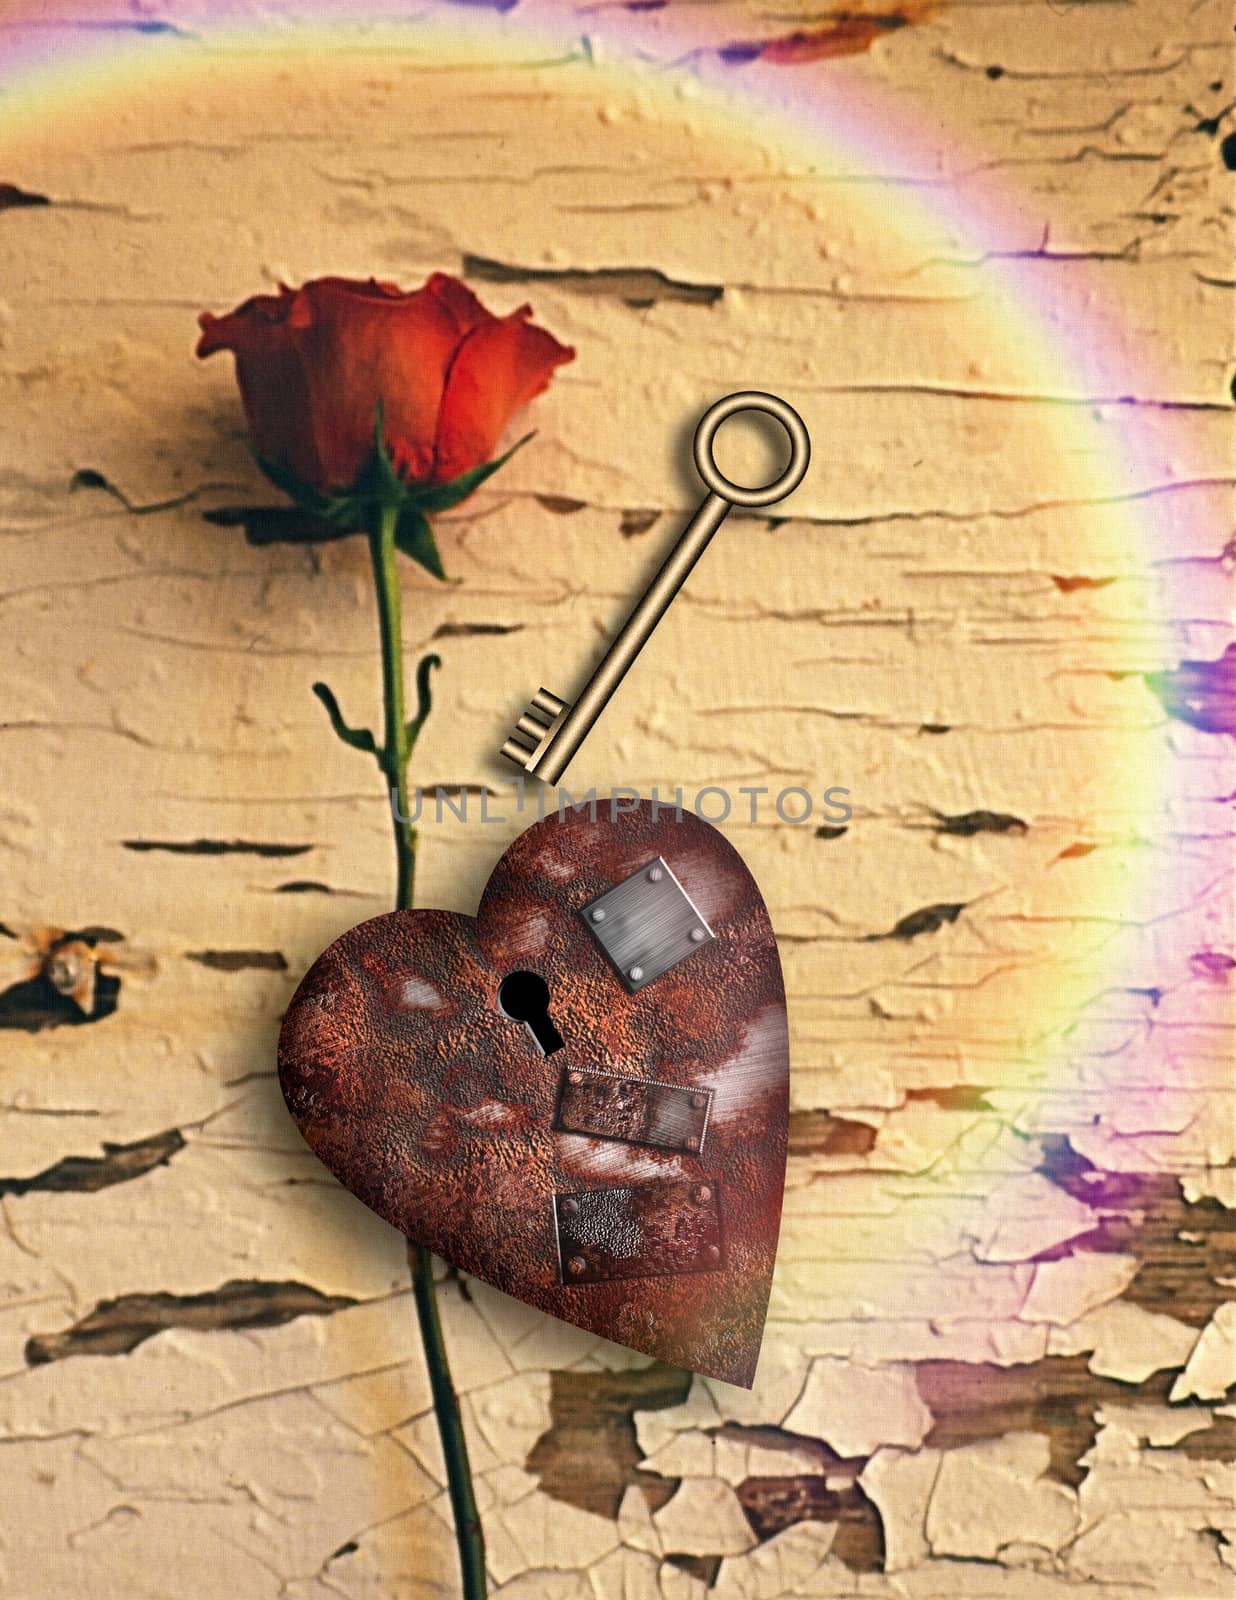 Rusted love by applesstock